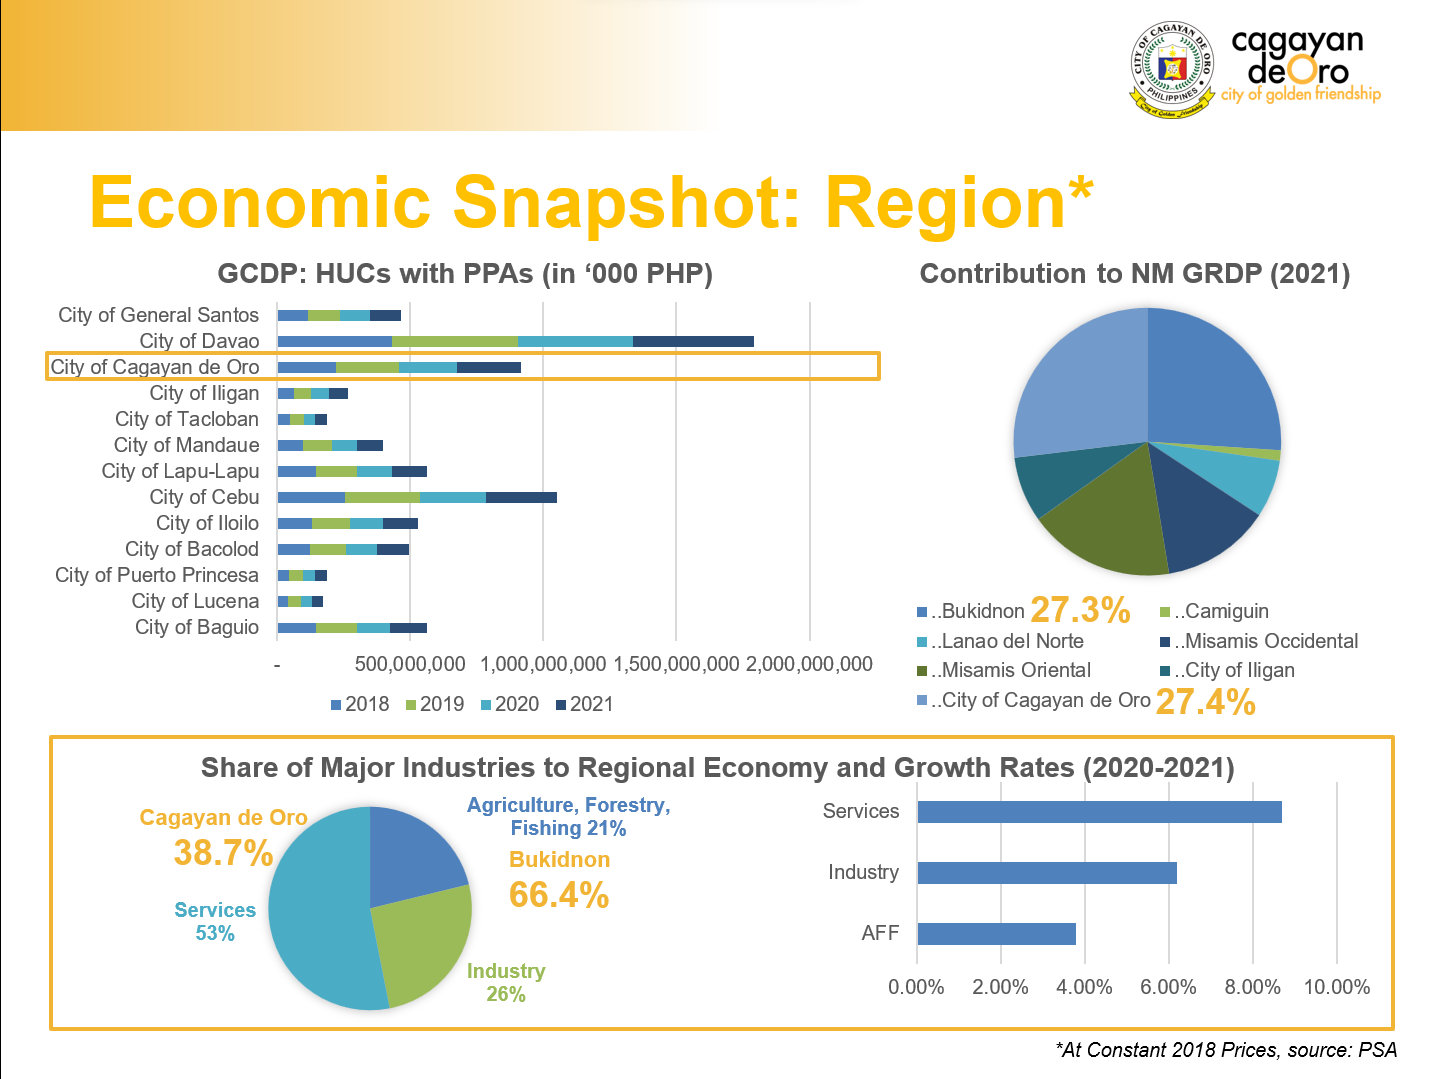 see Cagayan de Oro’s Gross City Domestic Product in comparison with other highly-urbanized cities (HUCs) 